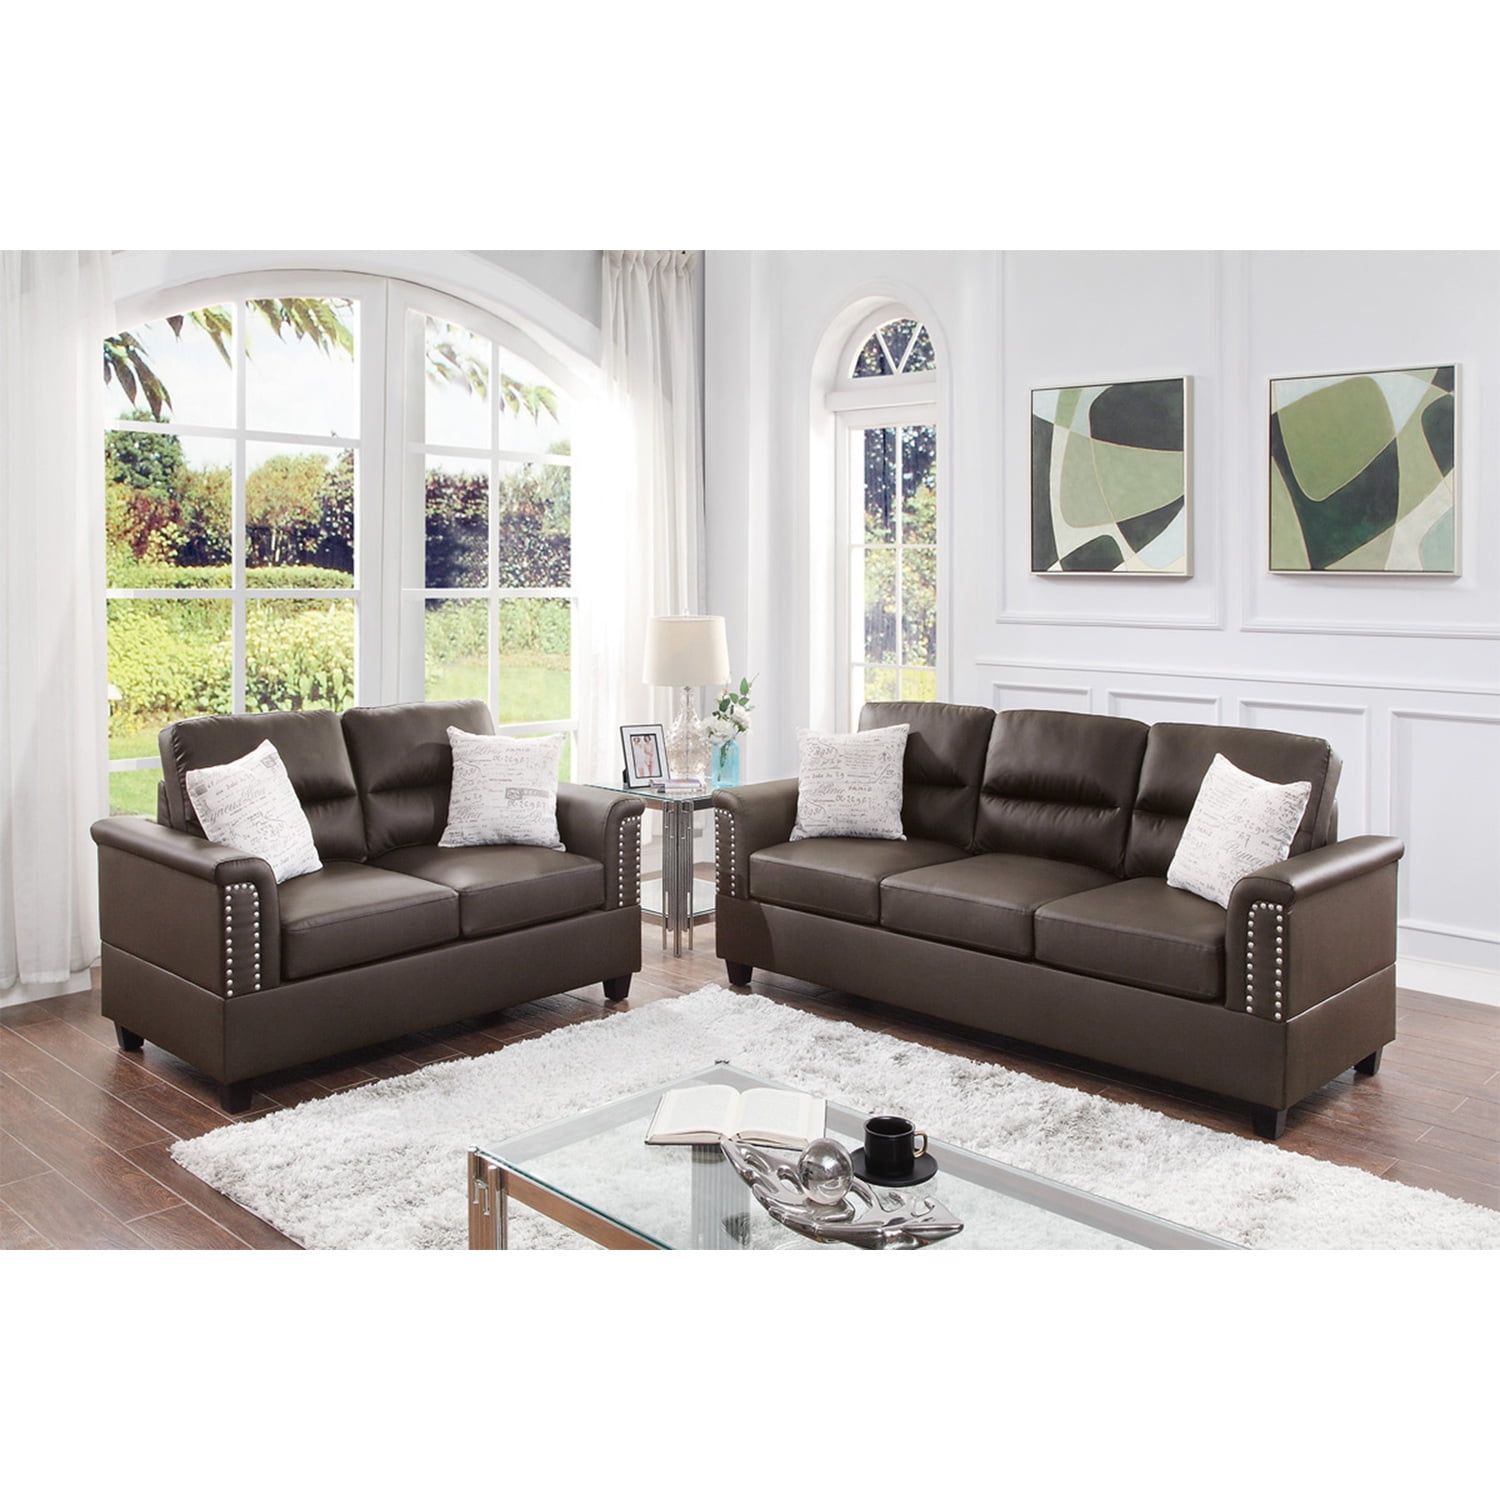 Poundex Furniture 2 Piece Faux Leather Sofa And Loveseat Set In Espresso  Color – Walmart Regarding Faux Leather Sofas In Chocolate Brown (View 15 of 15)